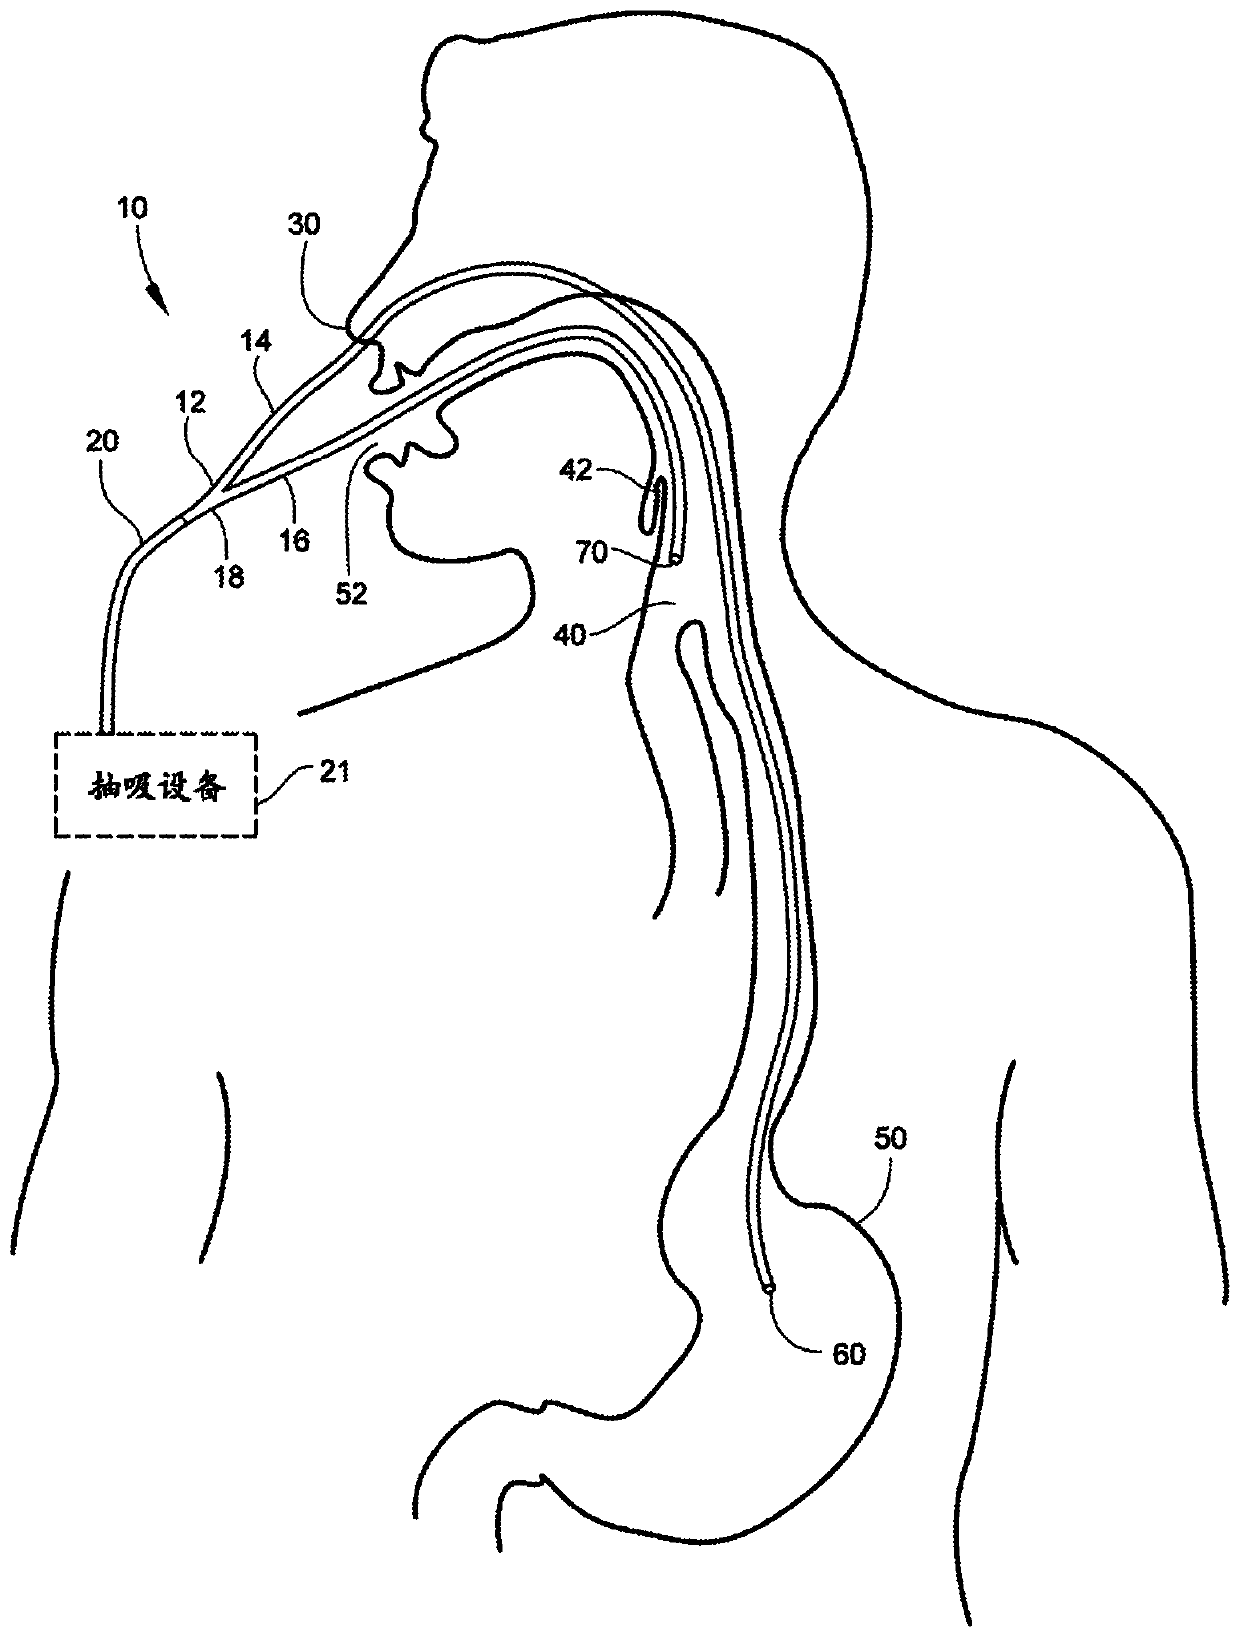 Medical apparatus with hypopharyngeal suctioning capability